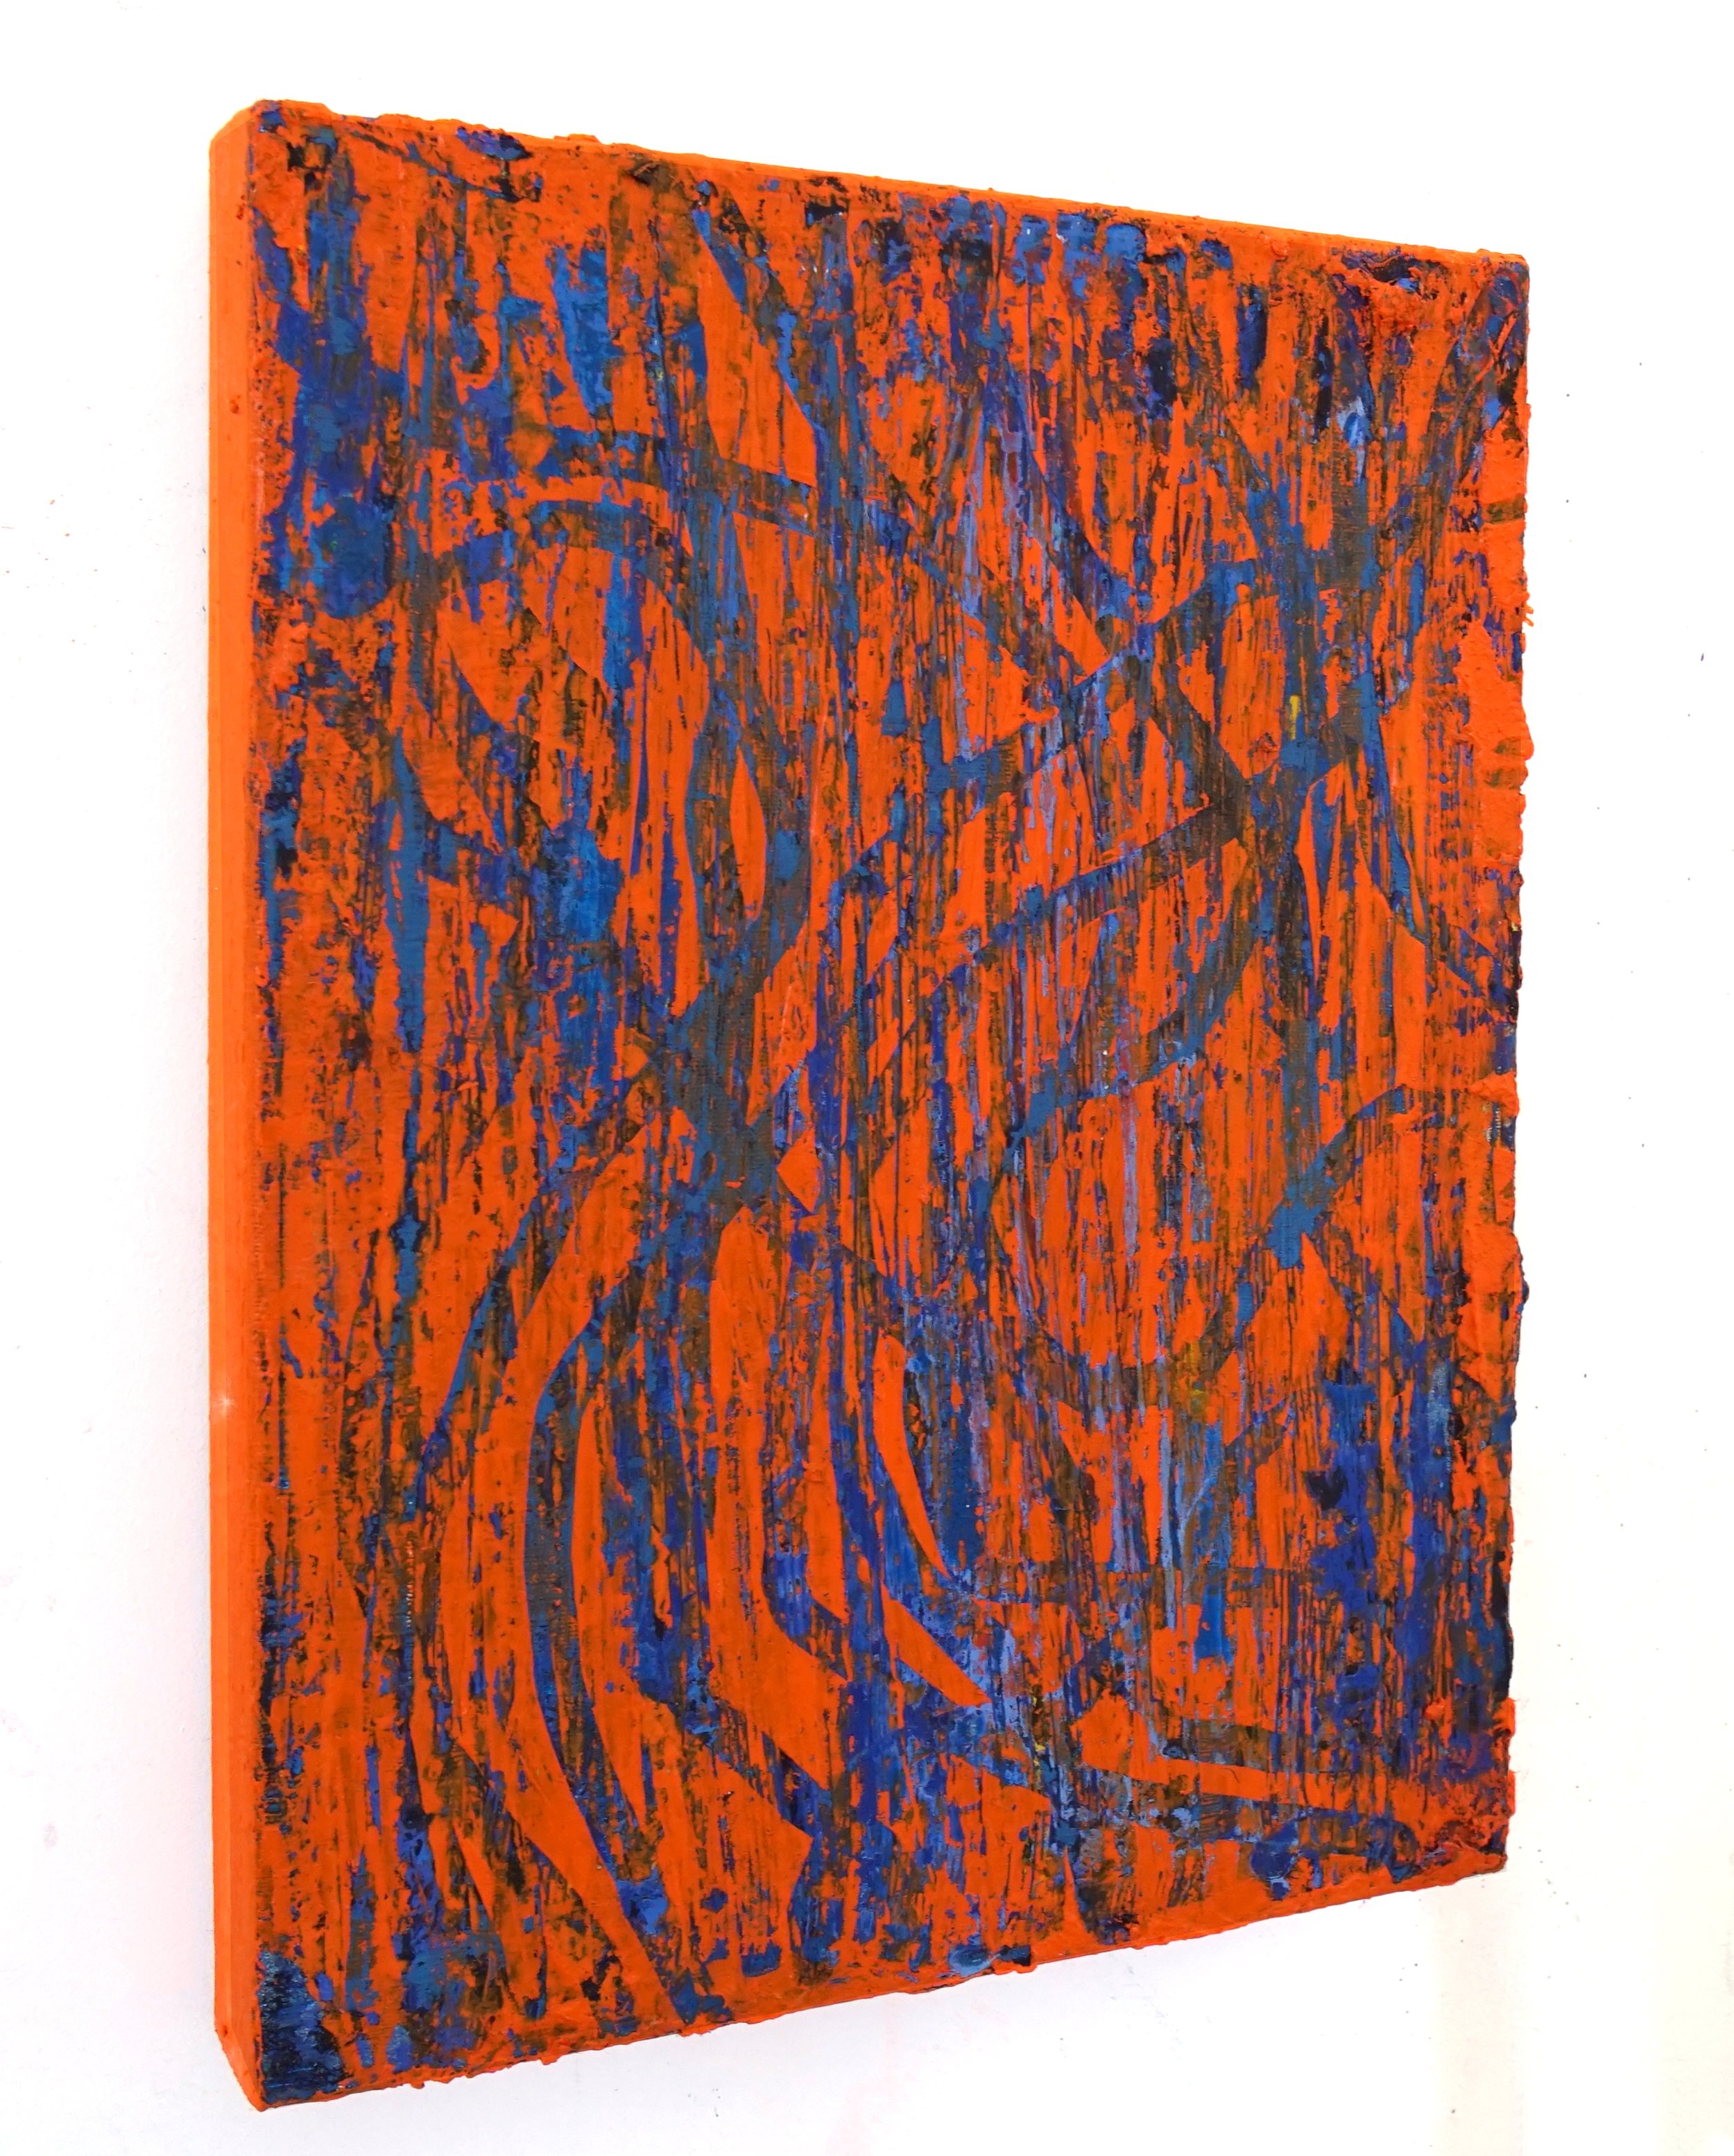 Study in Orange. Oil, Beeswax, Glitters and Pigment on Canvas. 15''x12''. 2021